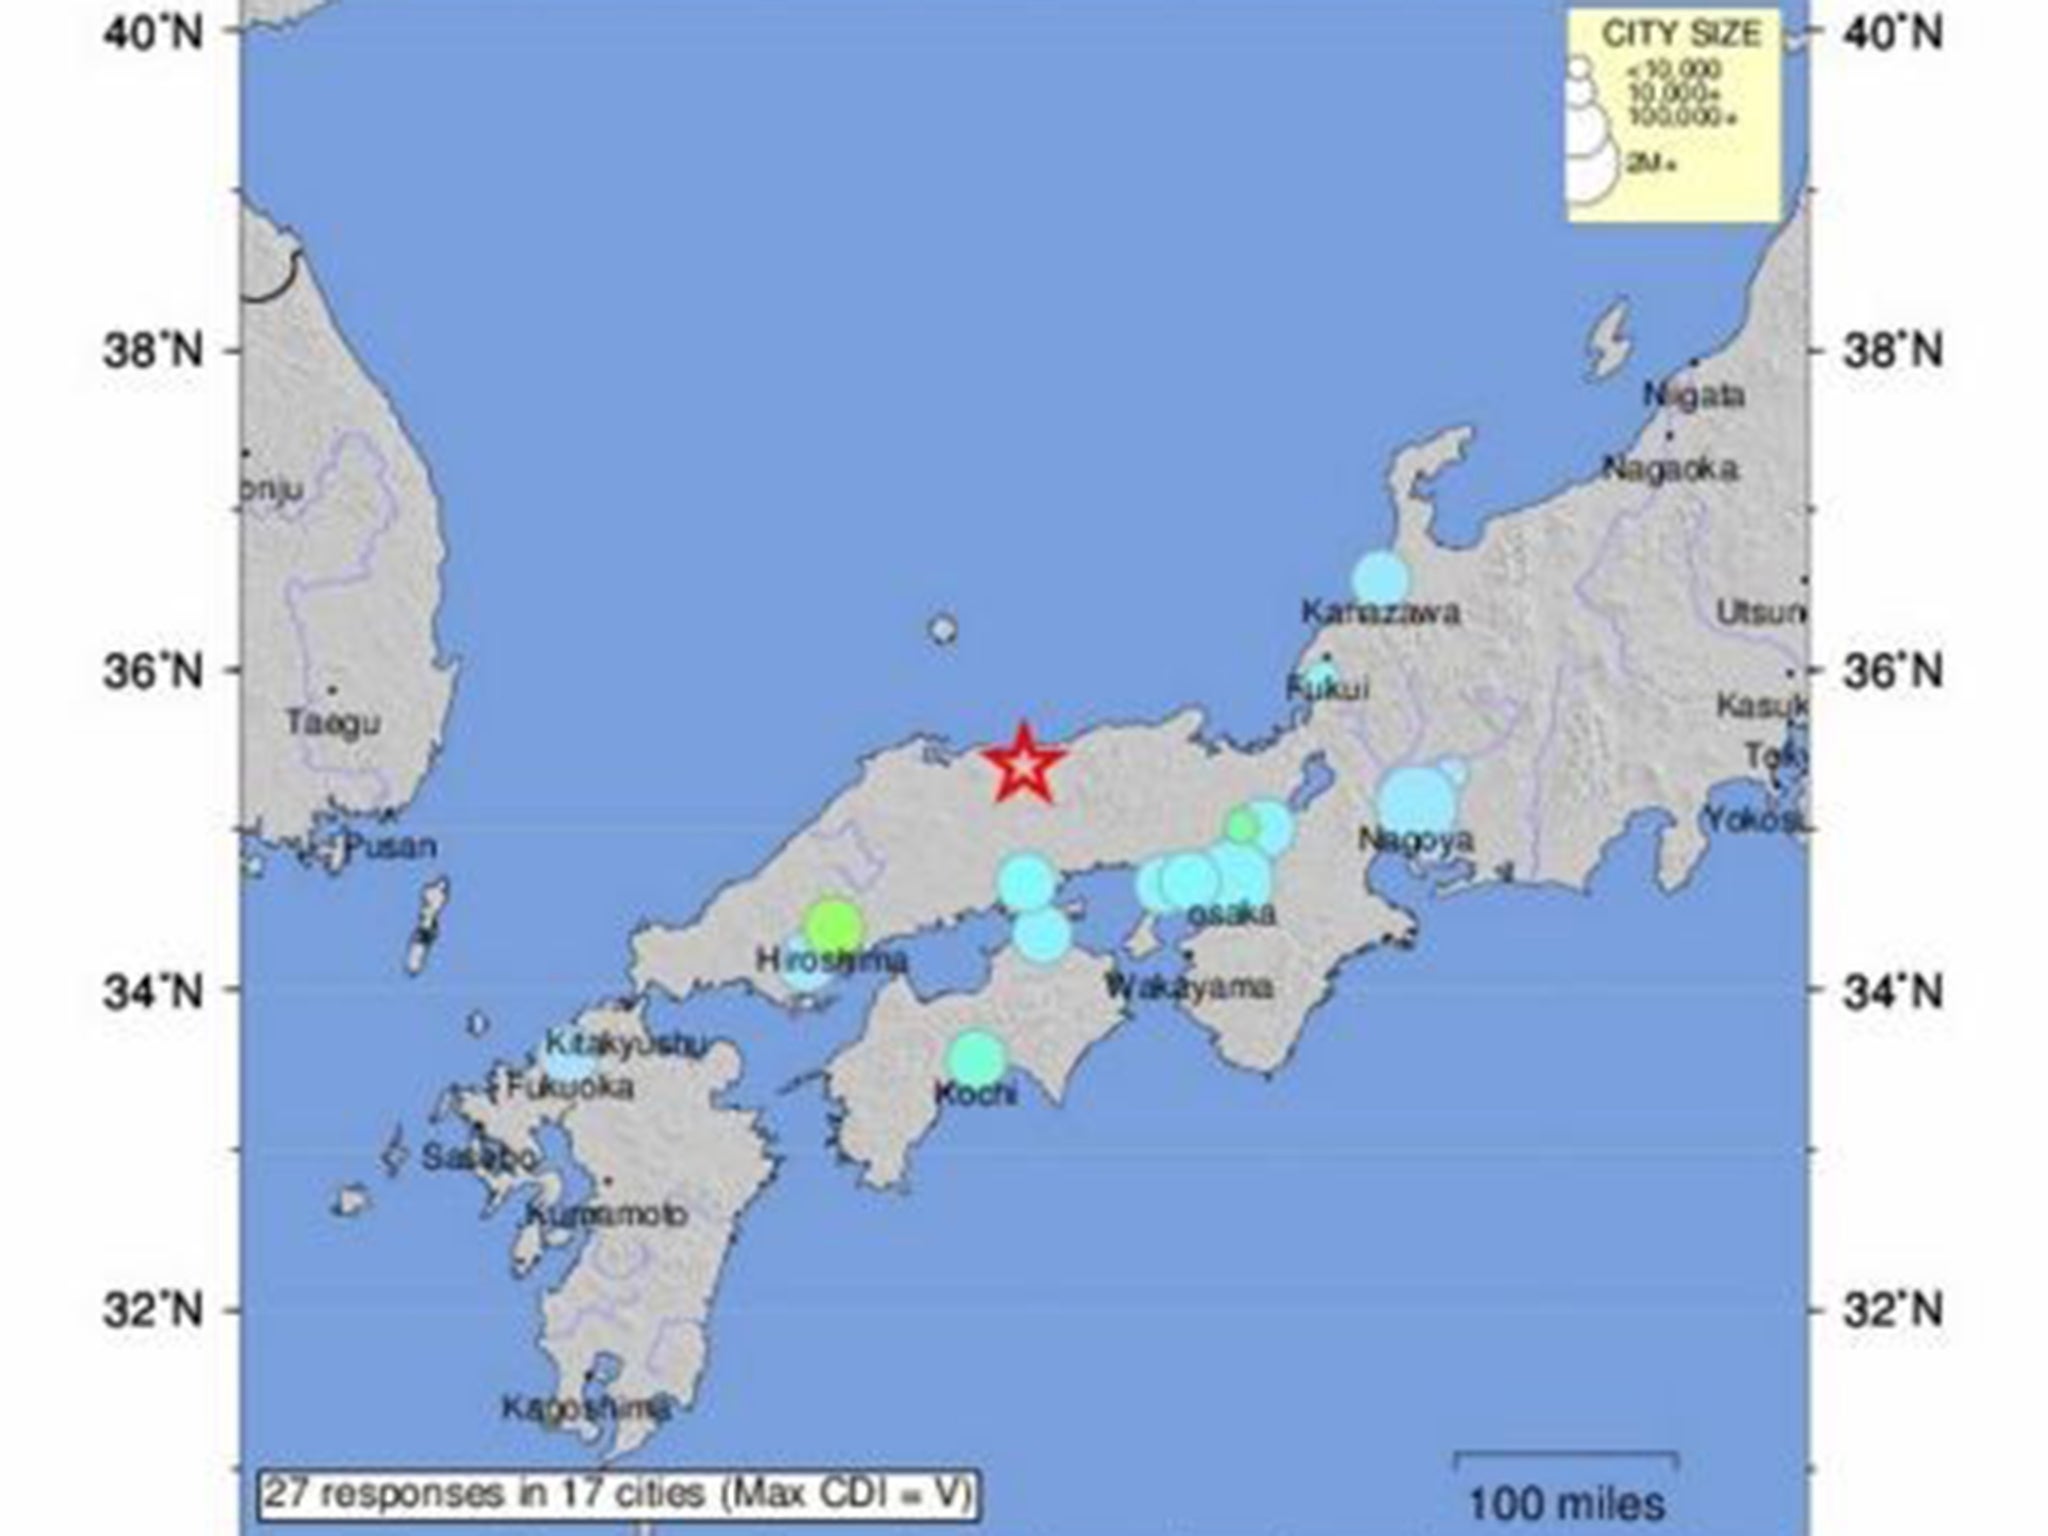 A handout showing where the earthquake struck in Misasa, Tottori Prefecture